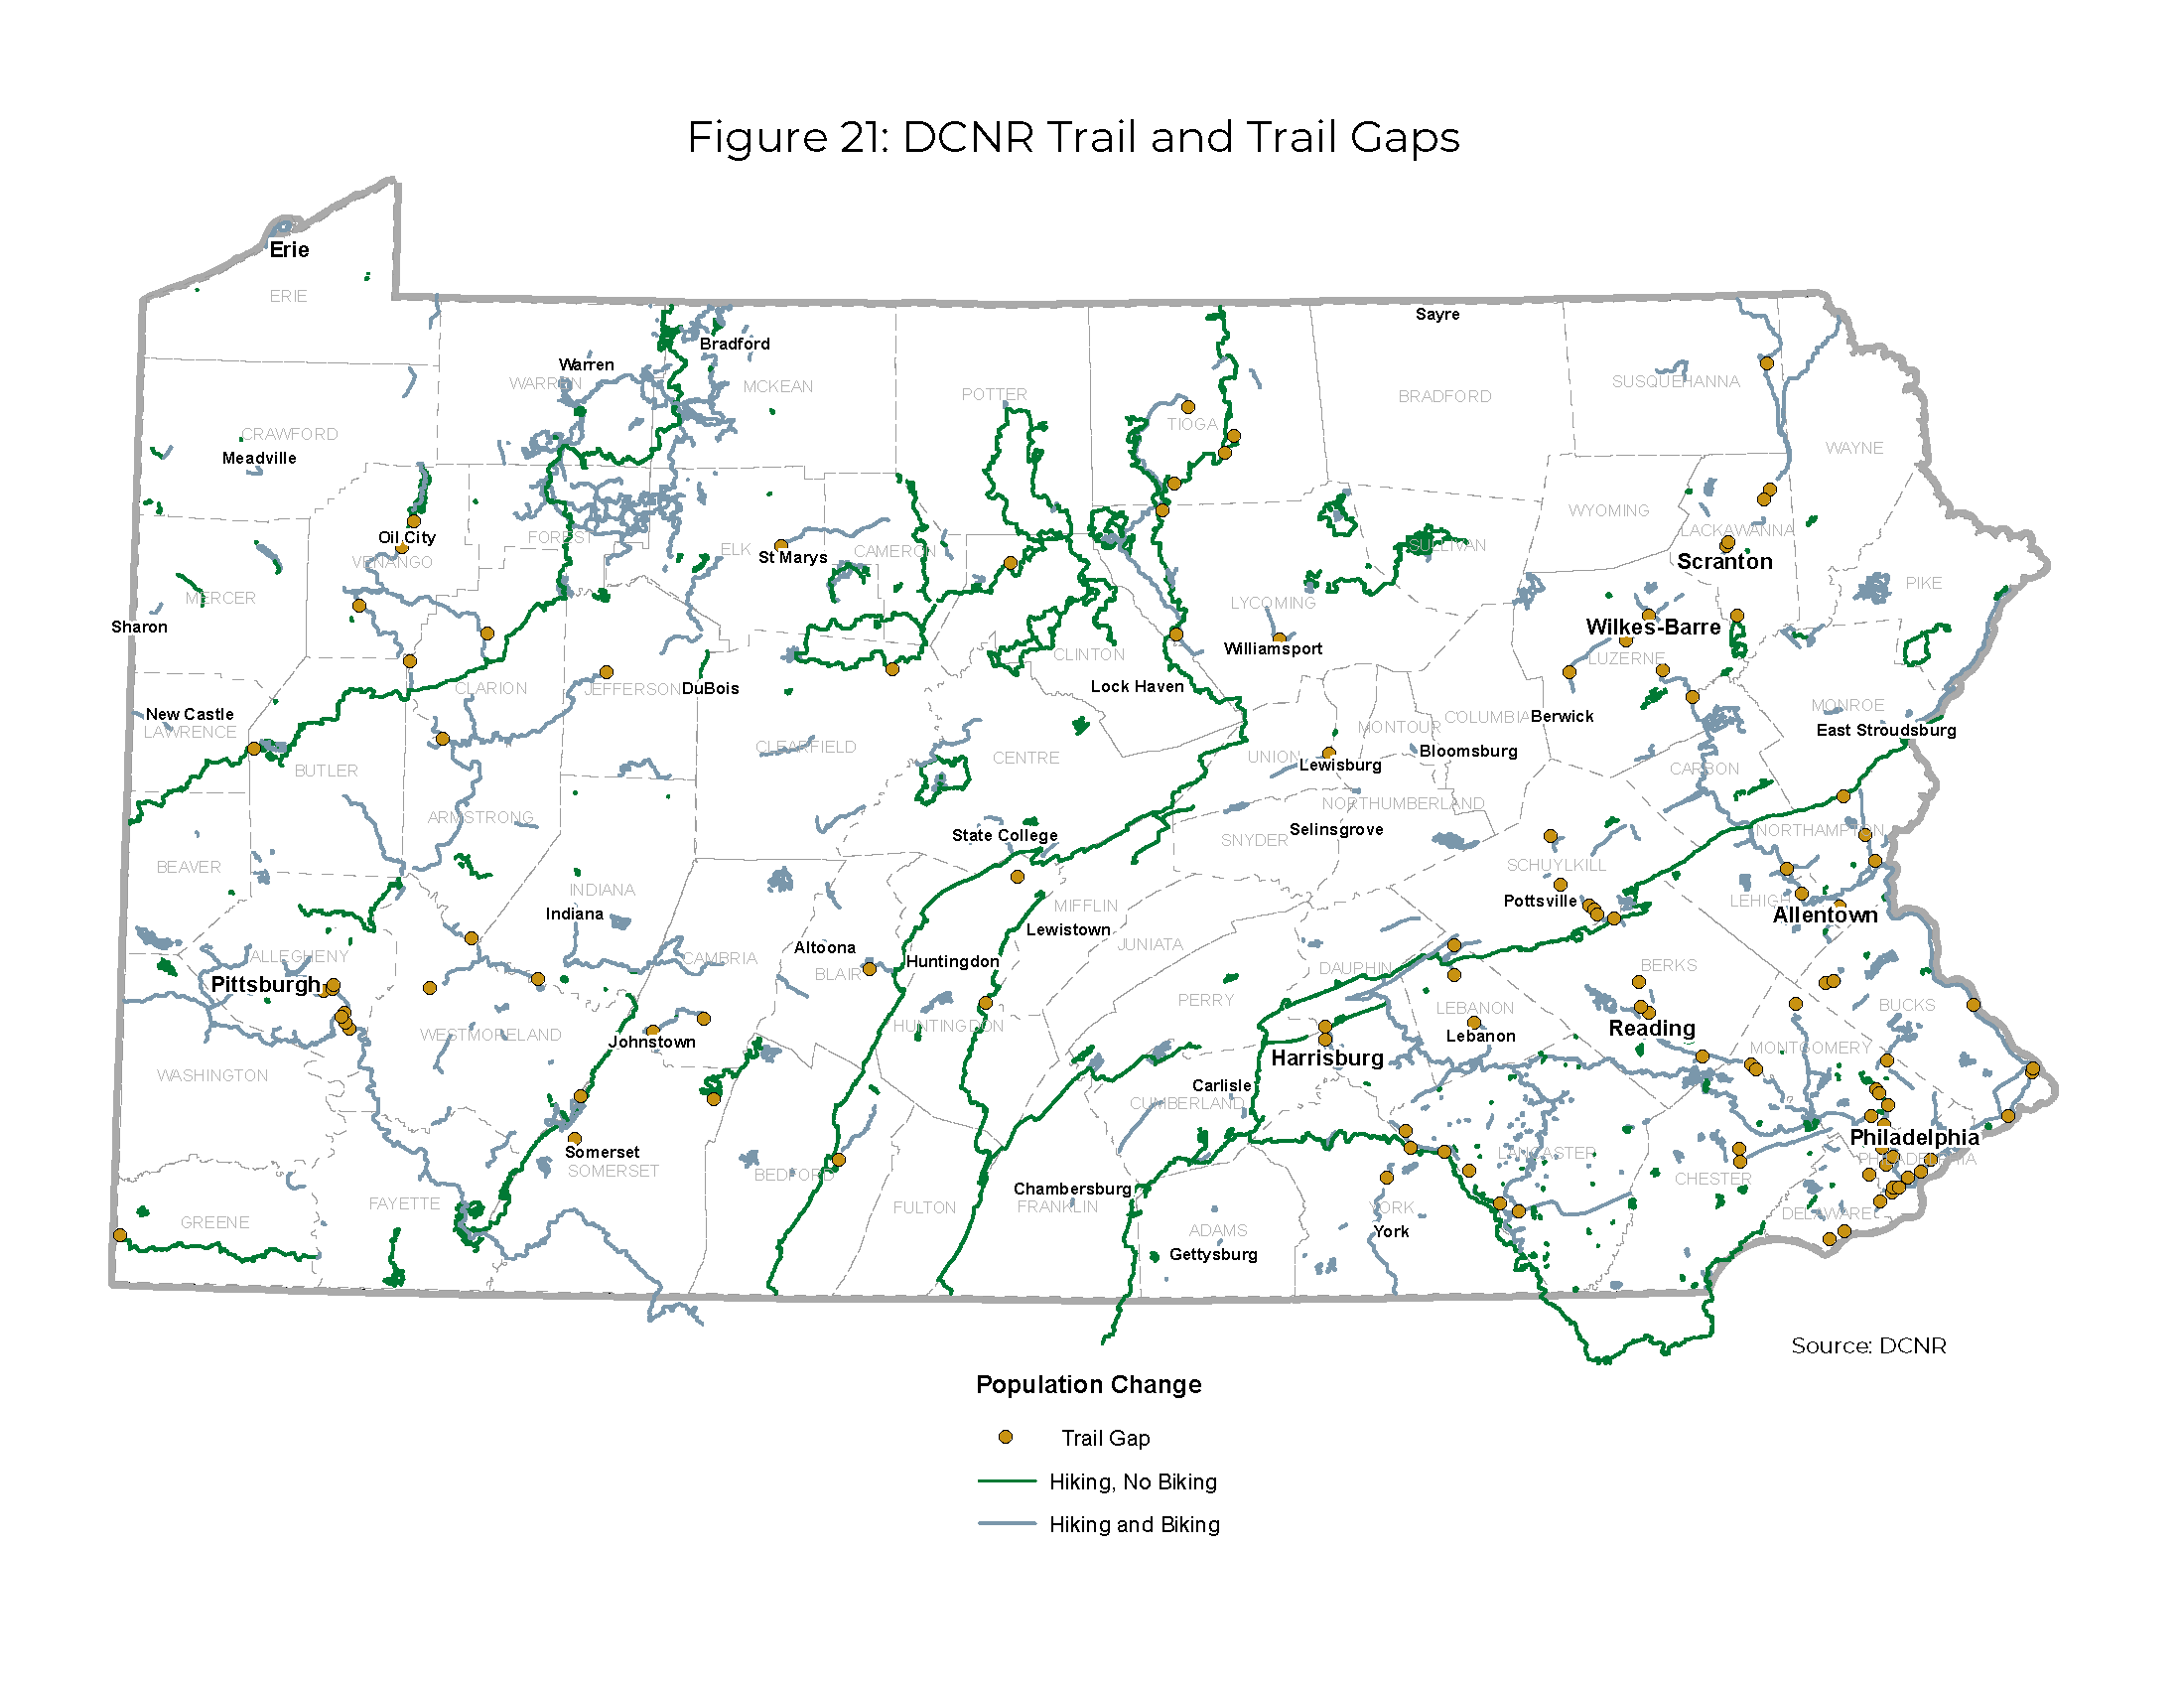 Map of Pennsylvania illustrating DCNR Trails with hiking and no biking, hiking and biking allowed and trail gaps.